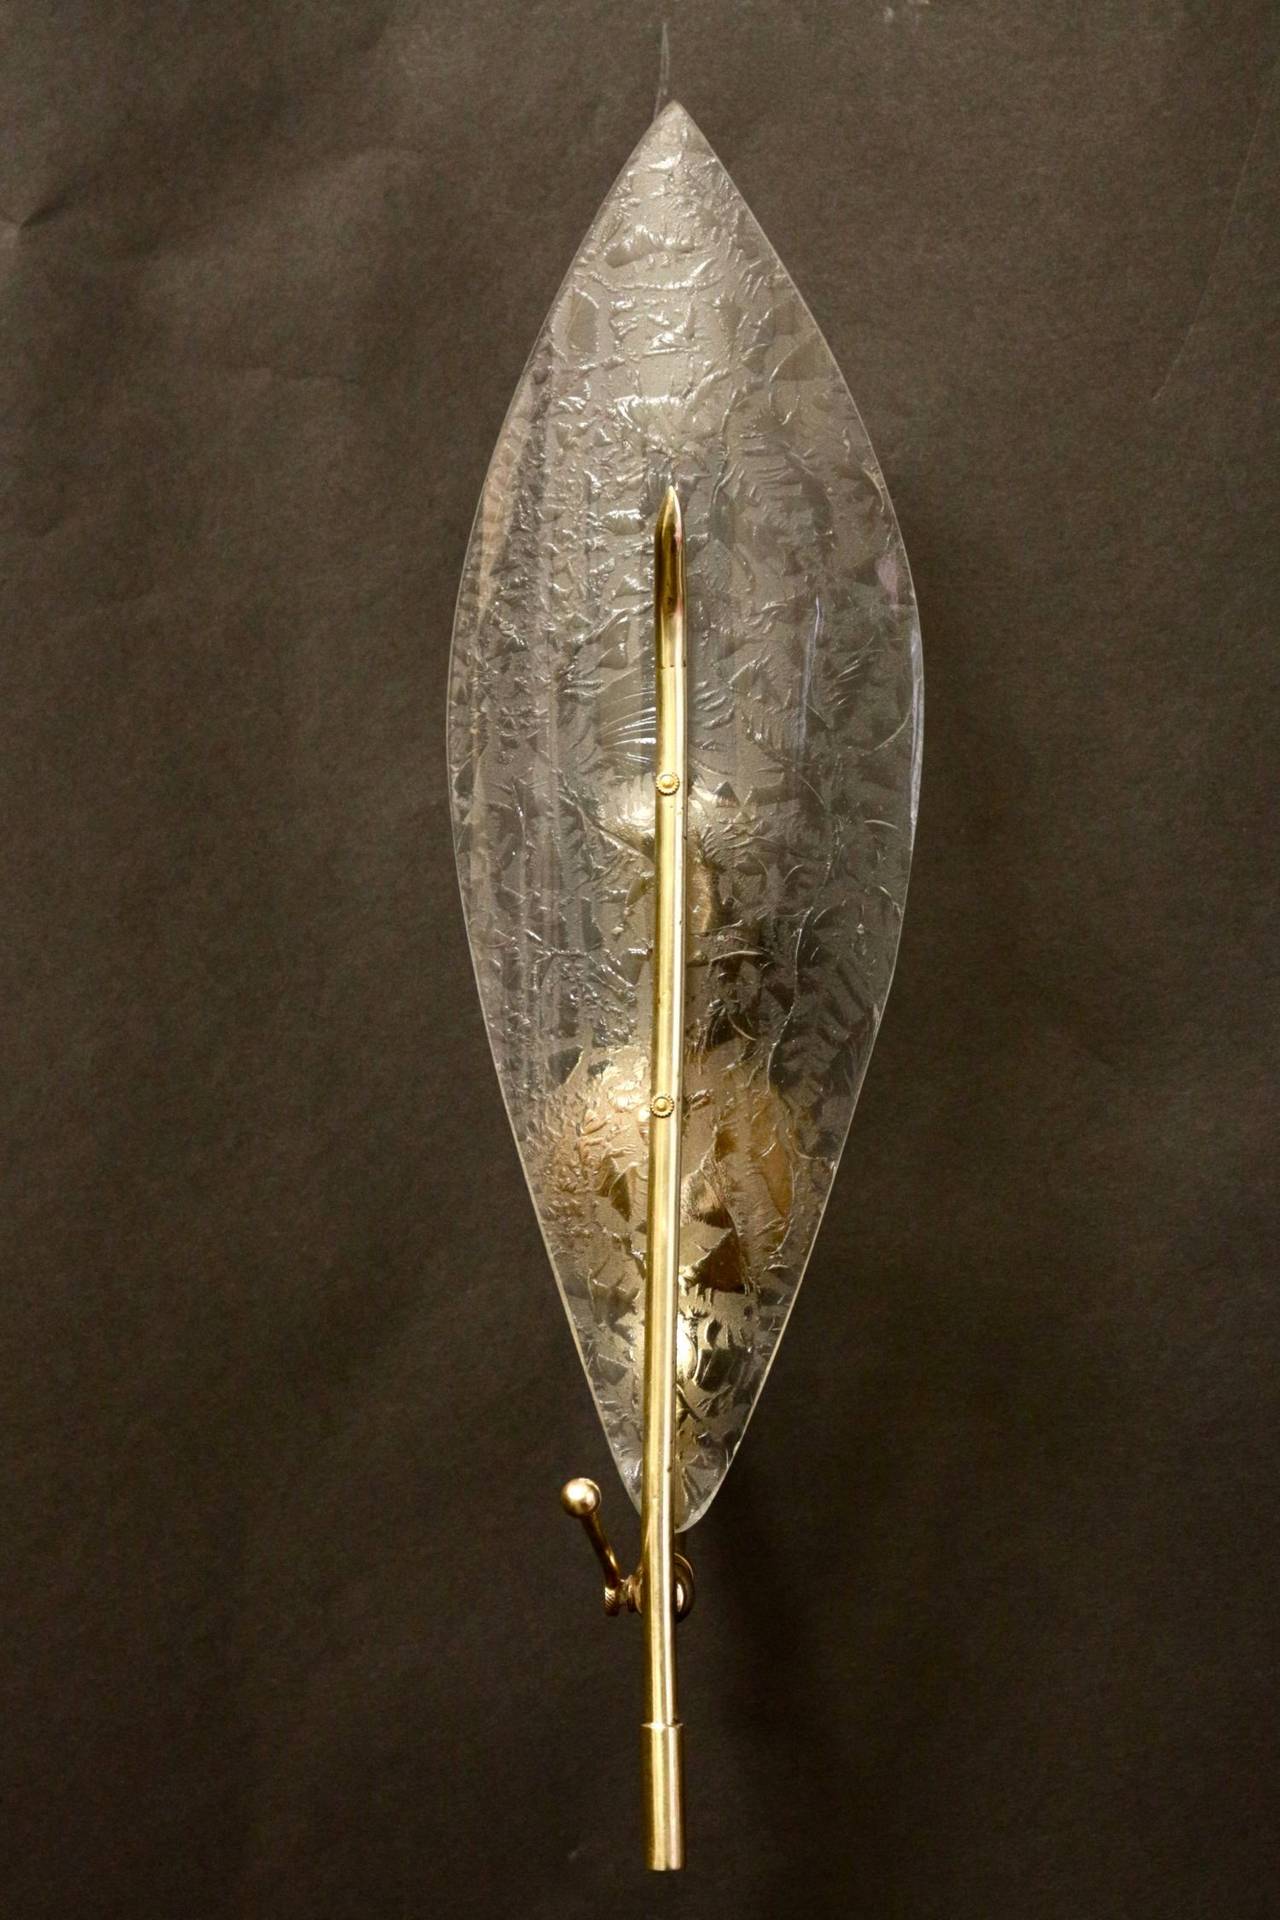 Pair of 1960s sconces attributed to Stilnovo composed of a Murano glass leave and a brass rod. Brass rod rack allows vertical inclination of the leave. One light arm per sconce.